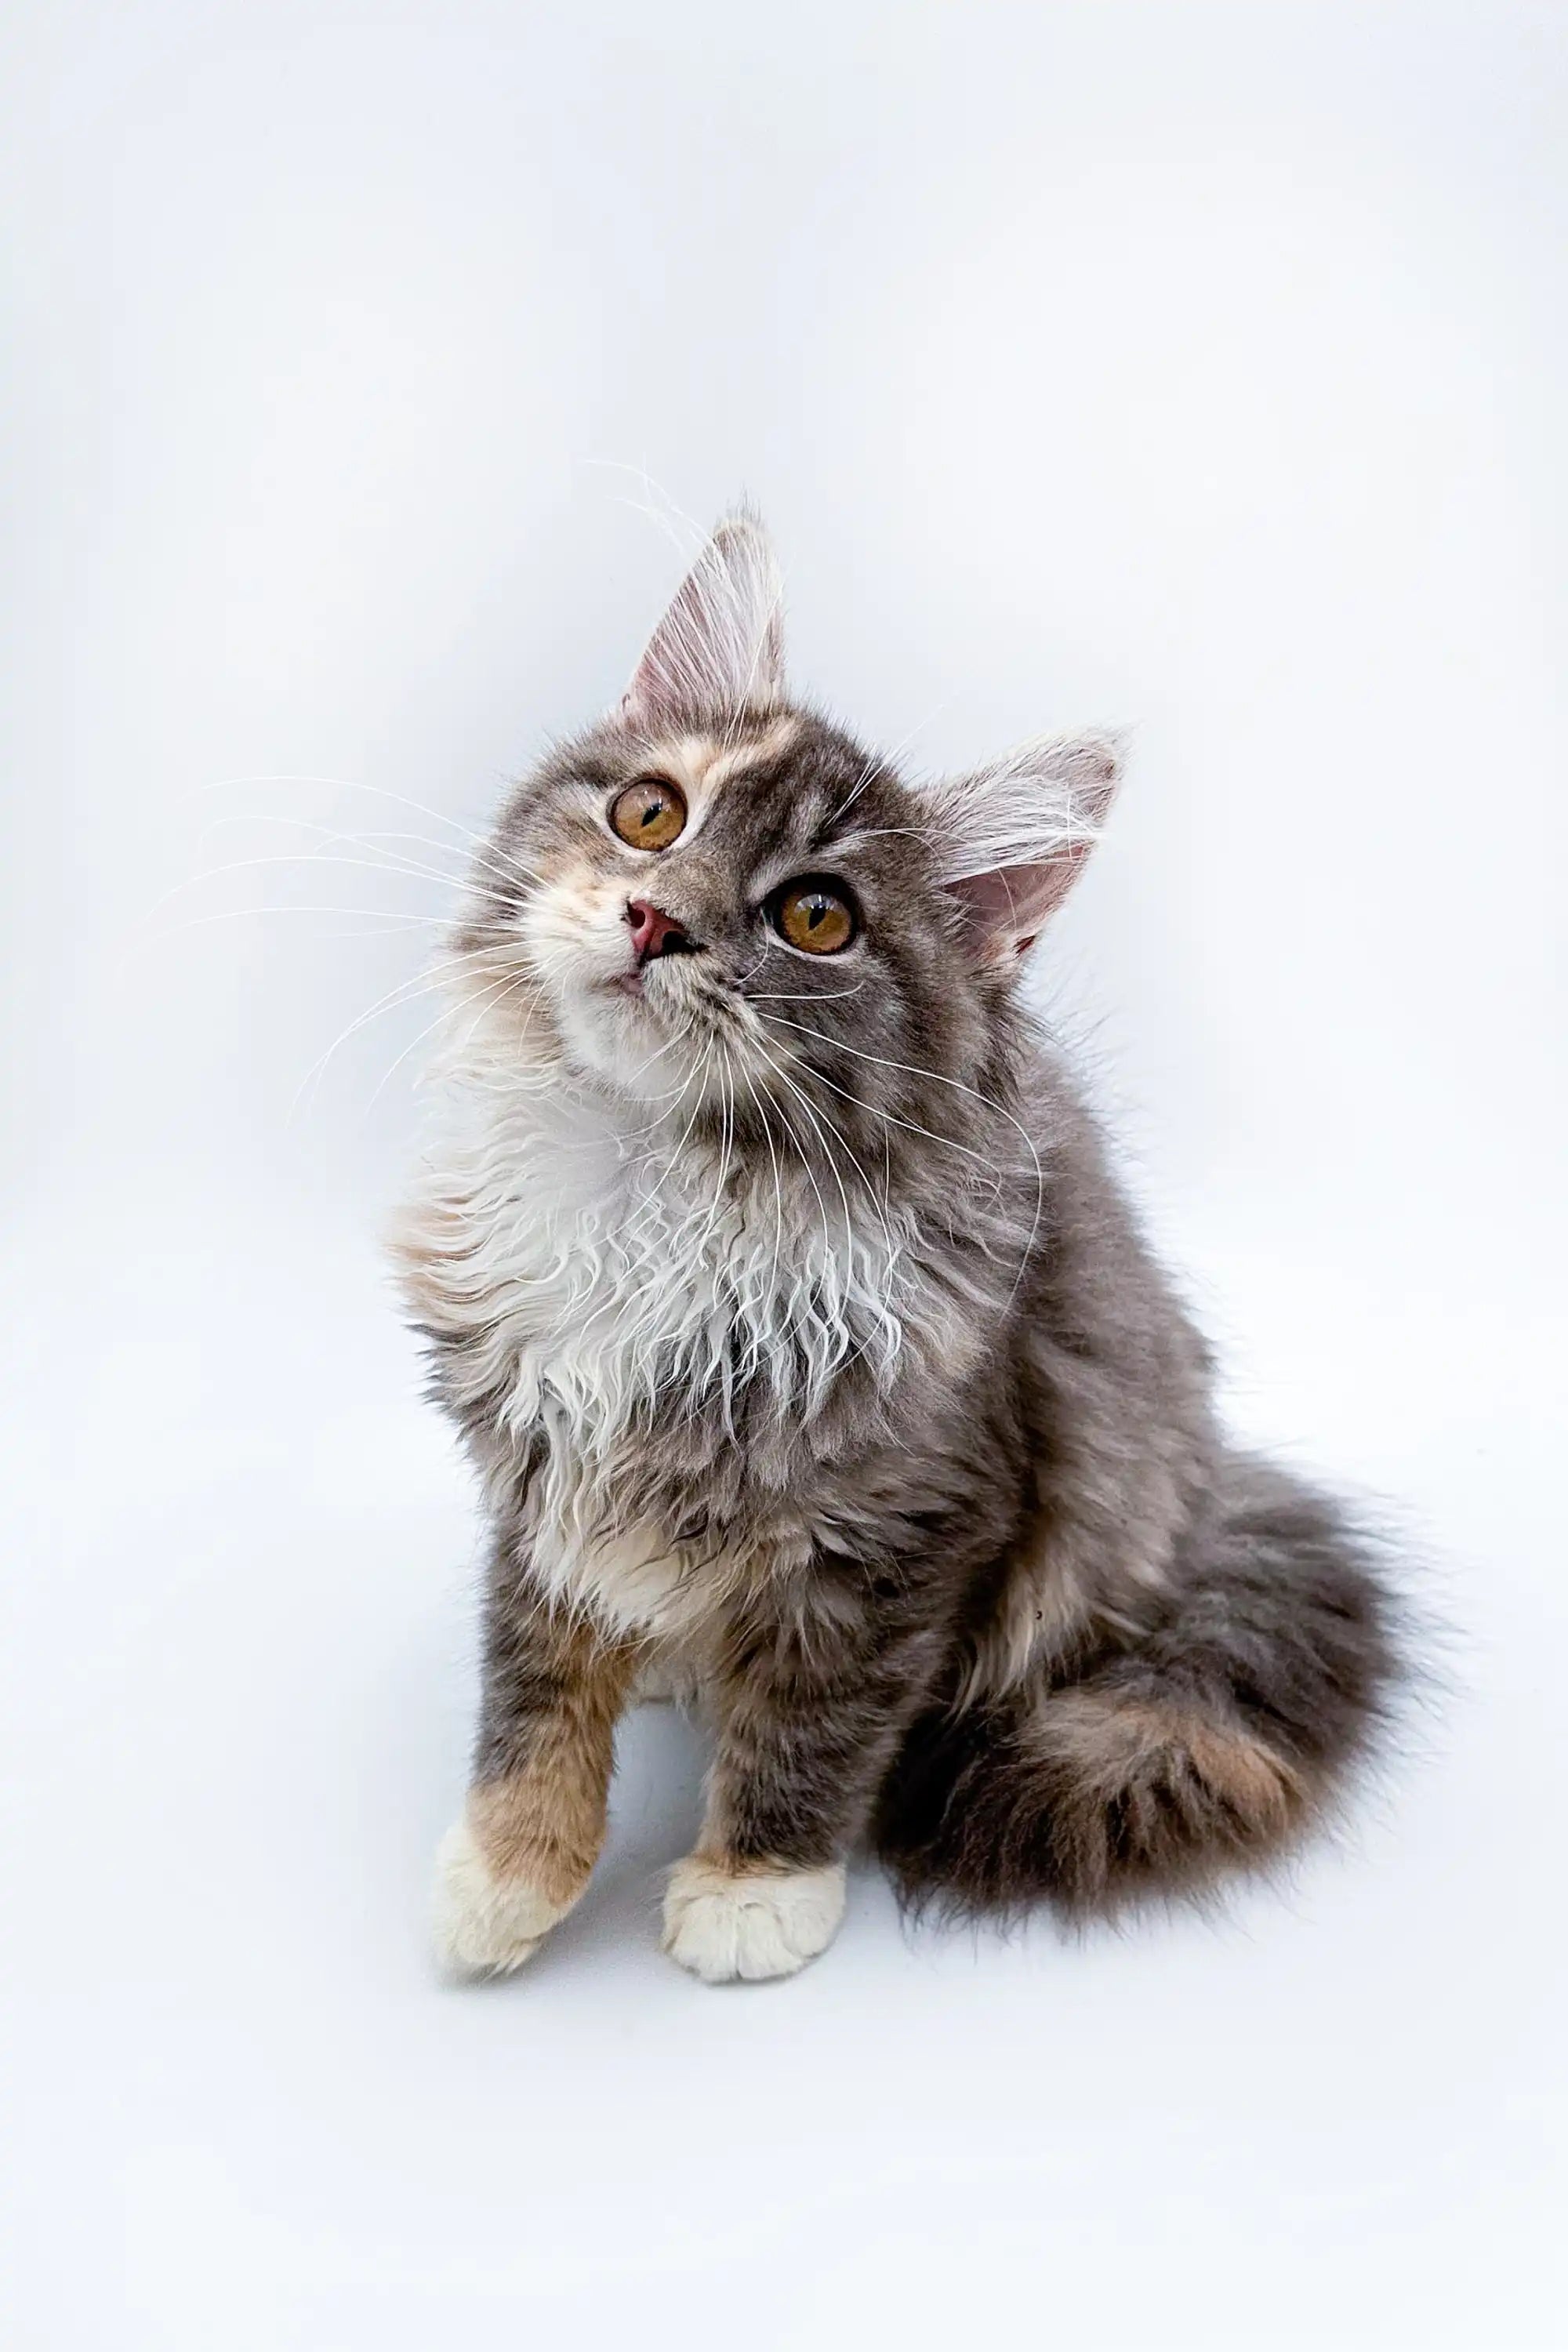 Maine Coon Kittens and Cats for Sale Fuji | Kitten